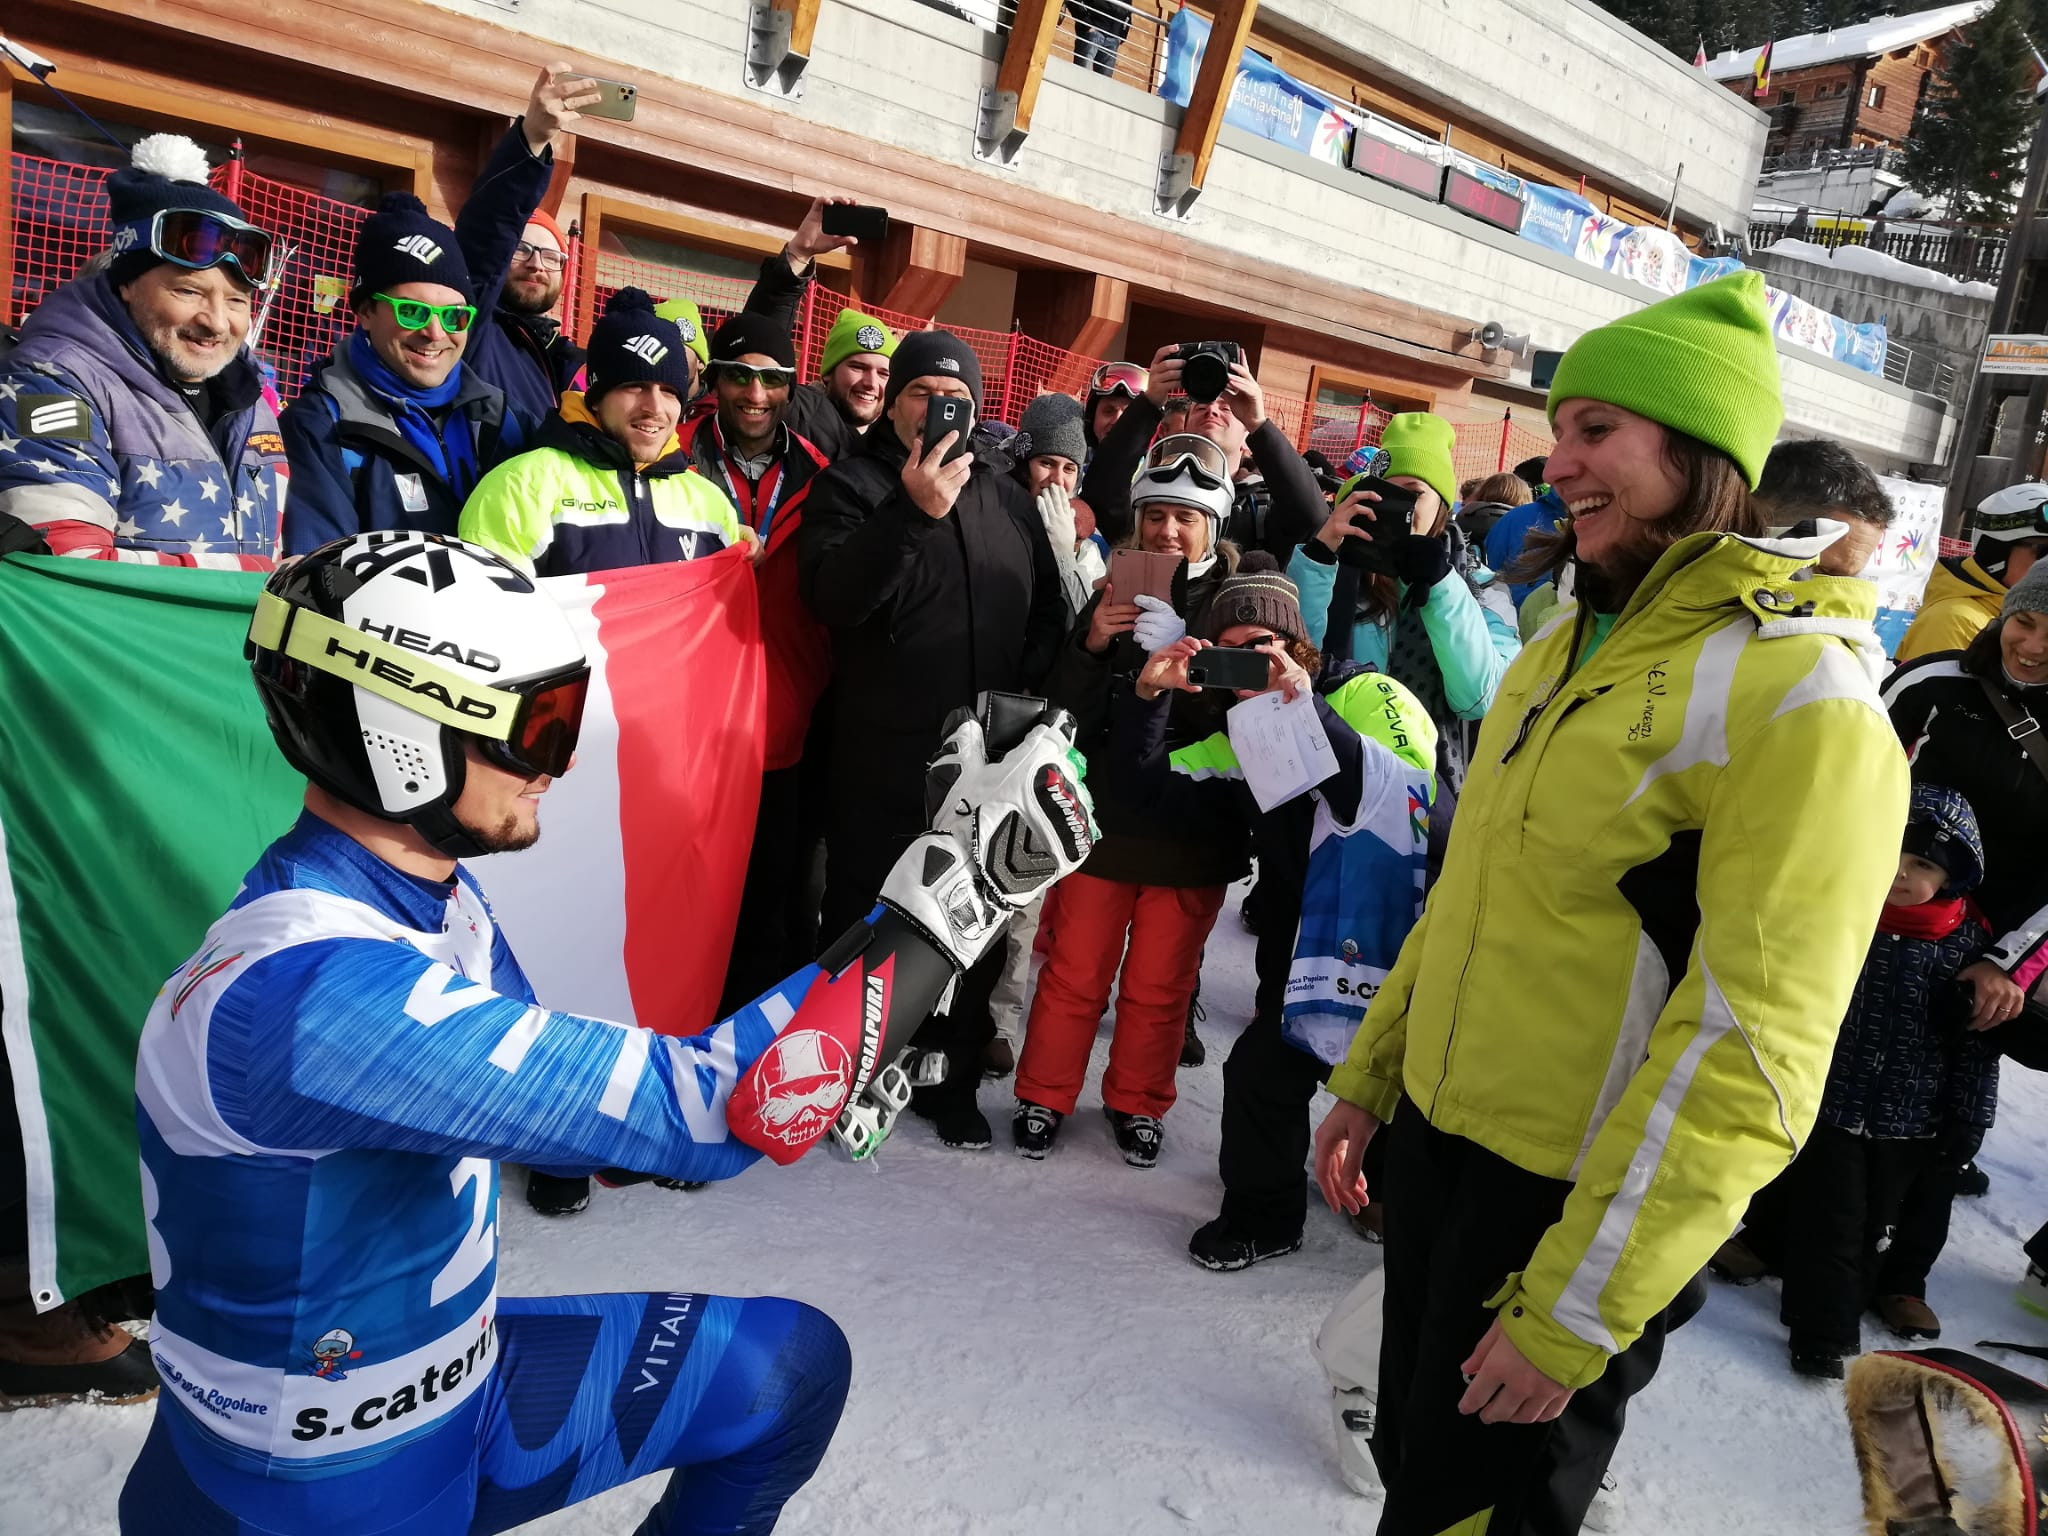 Giacomo Pierbon of Italy proposed to his partner after winning the Super-G event at the Winter Deaflympics ©Winter Deaflympics